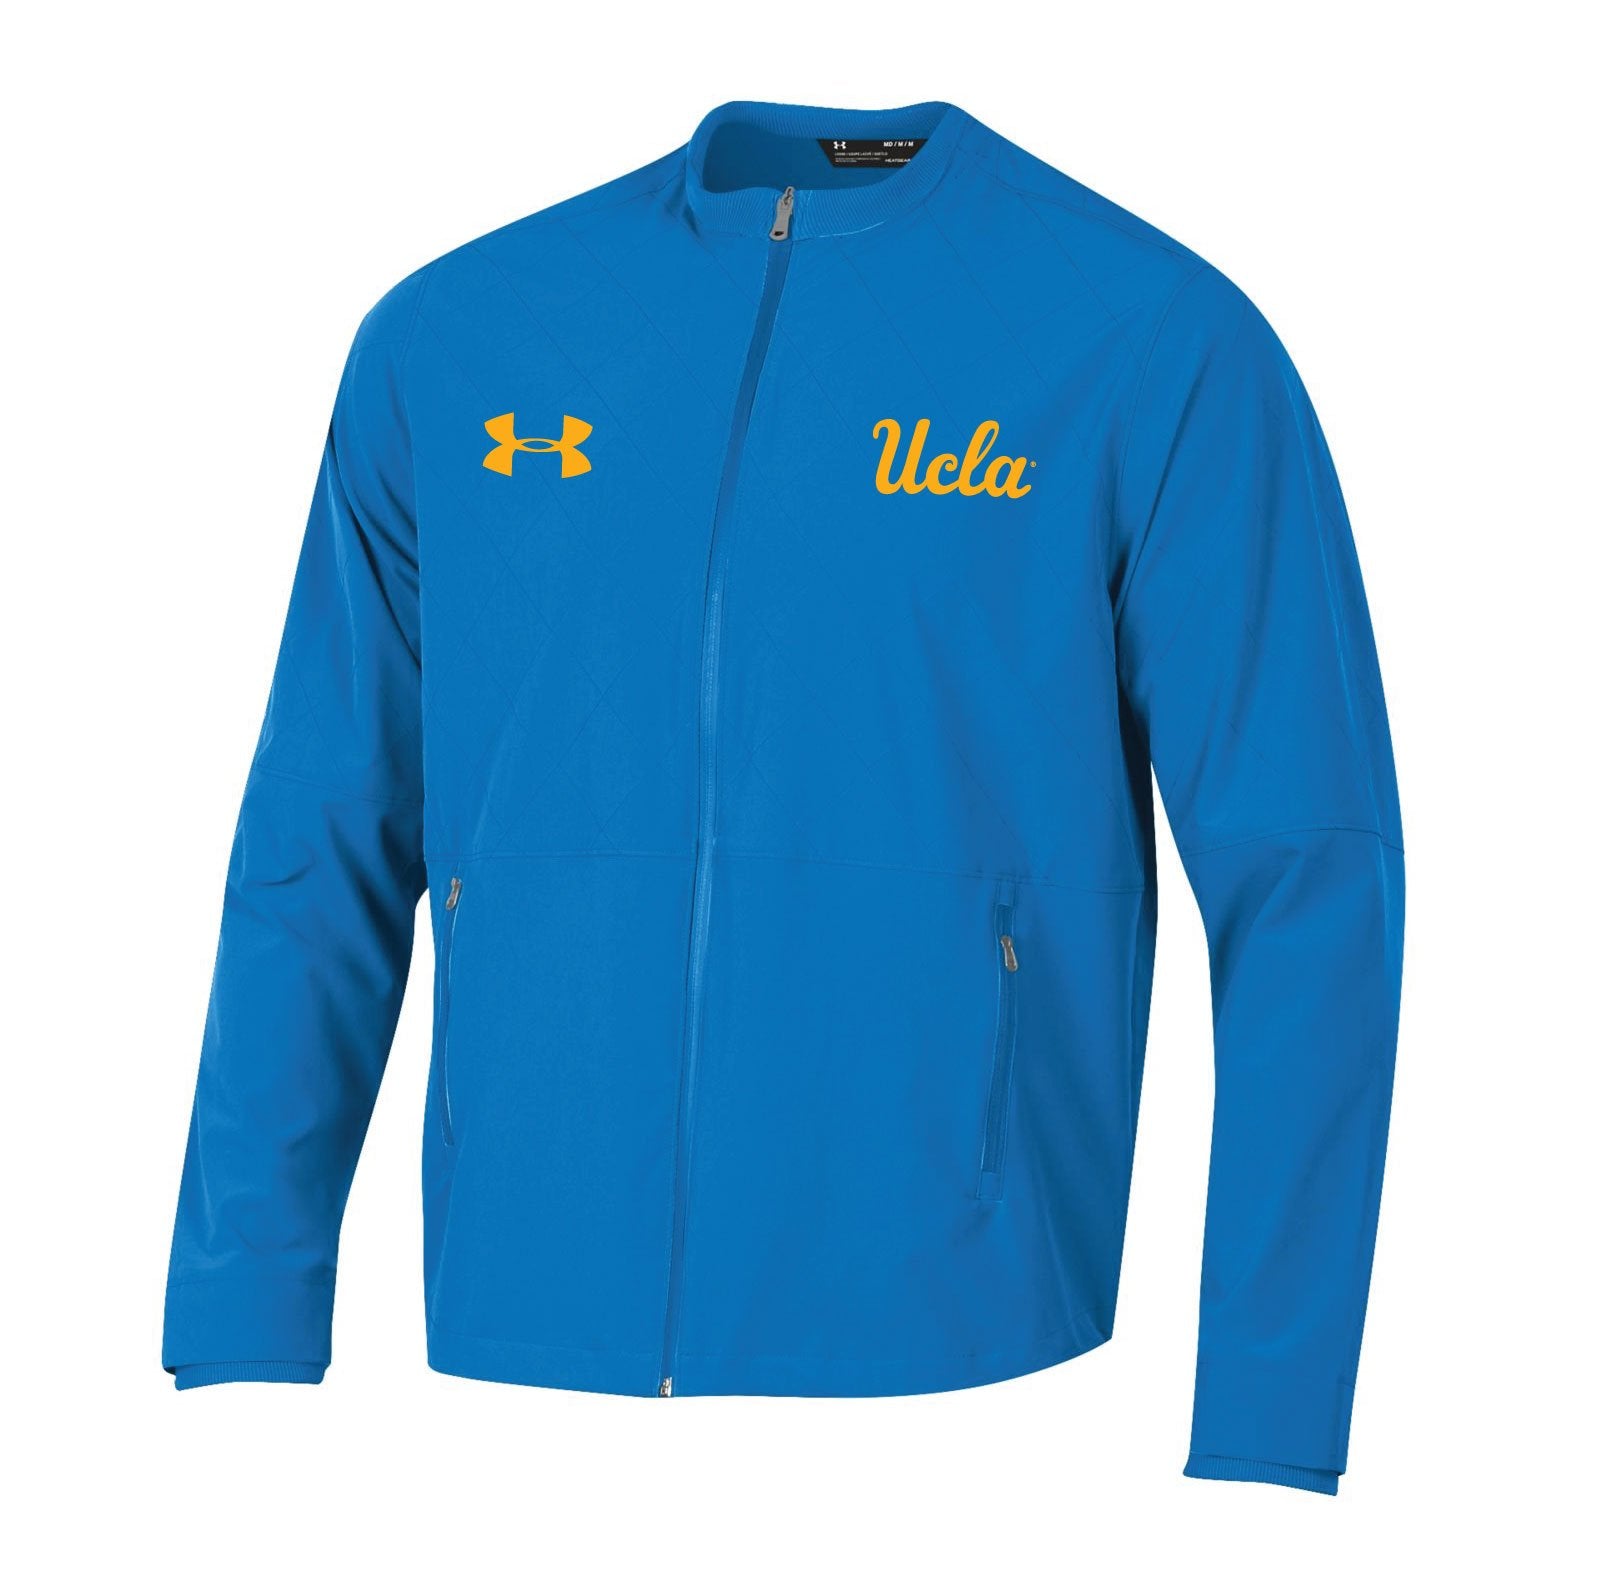 UCLA is now with Under Armour which brought back the full UCLA